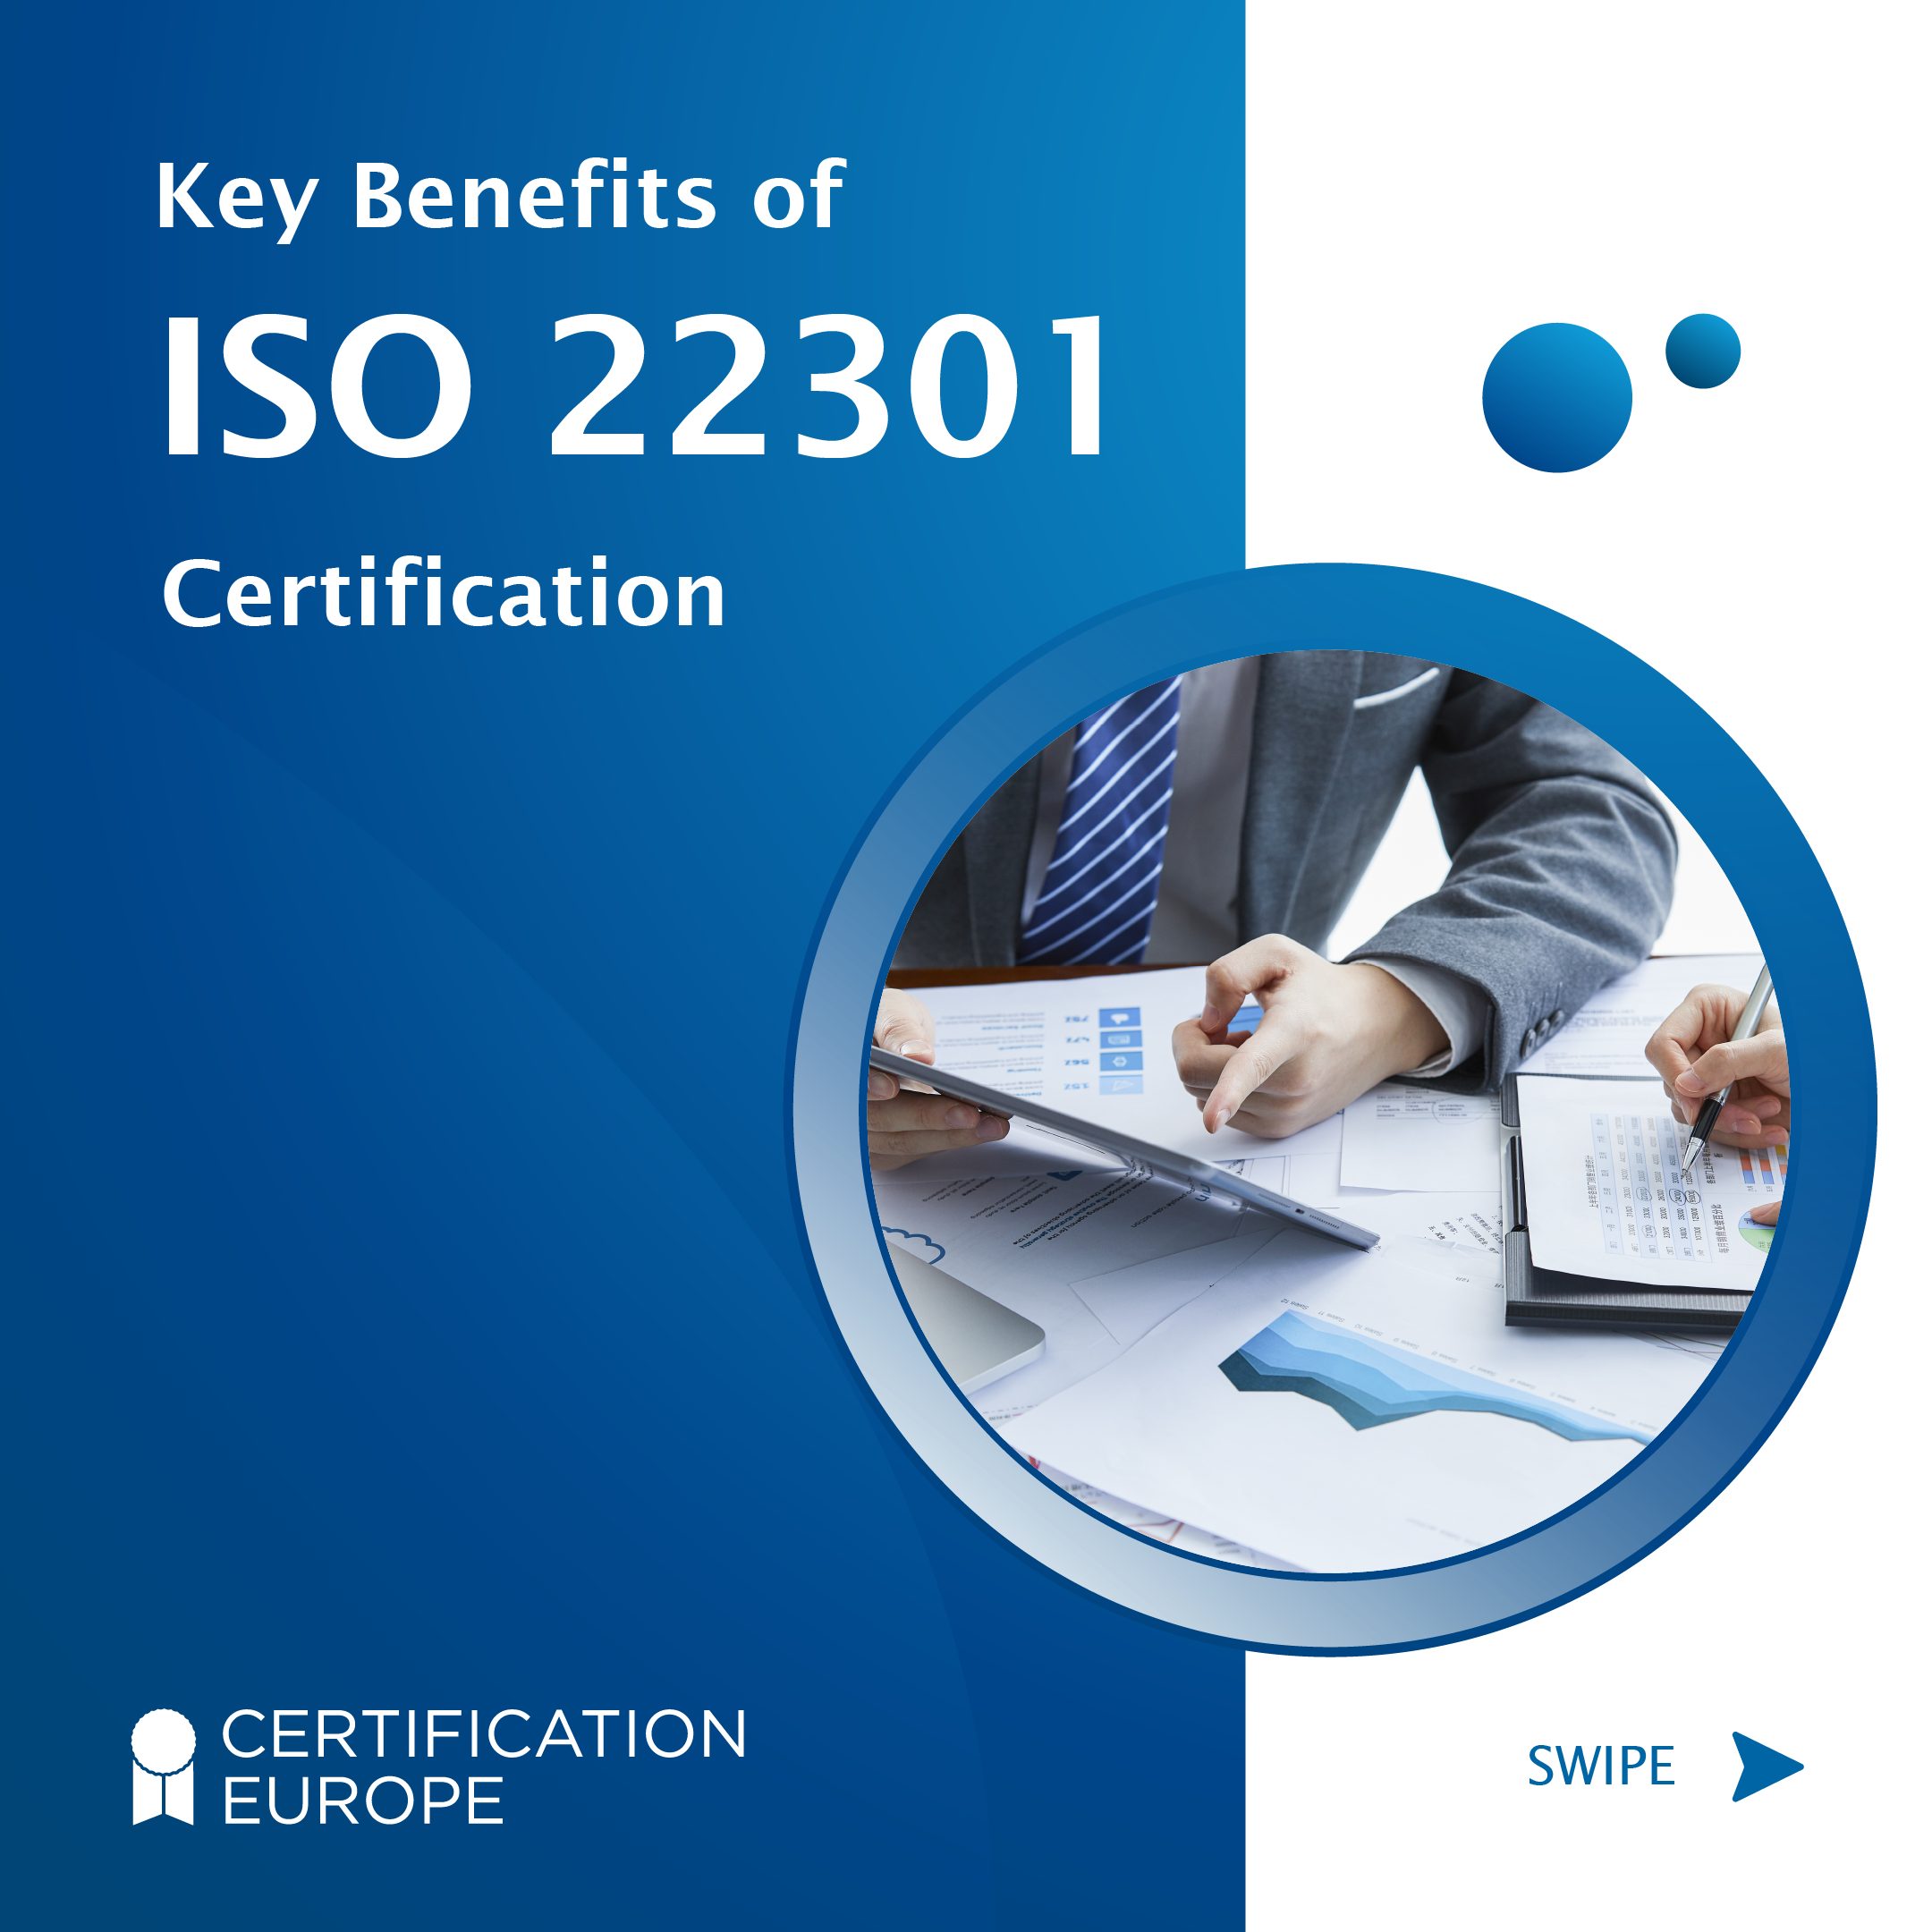 Key benefits of ISO 22301 Certification